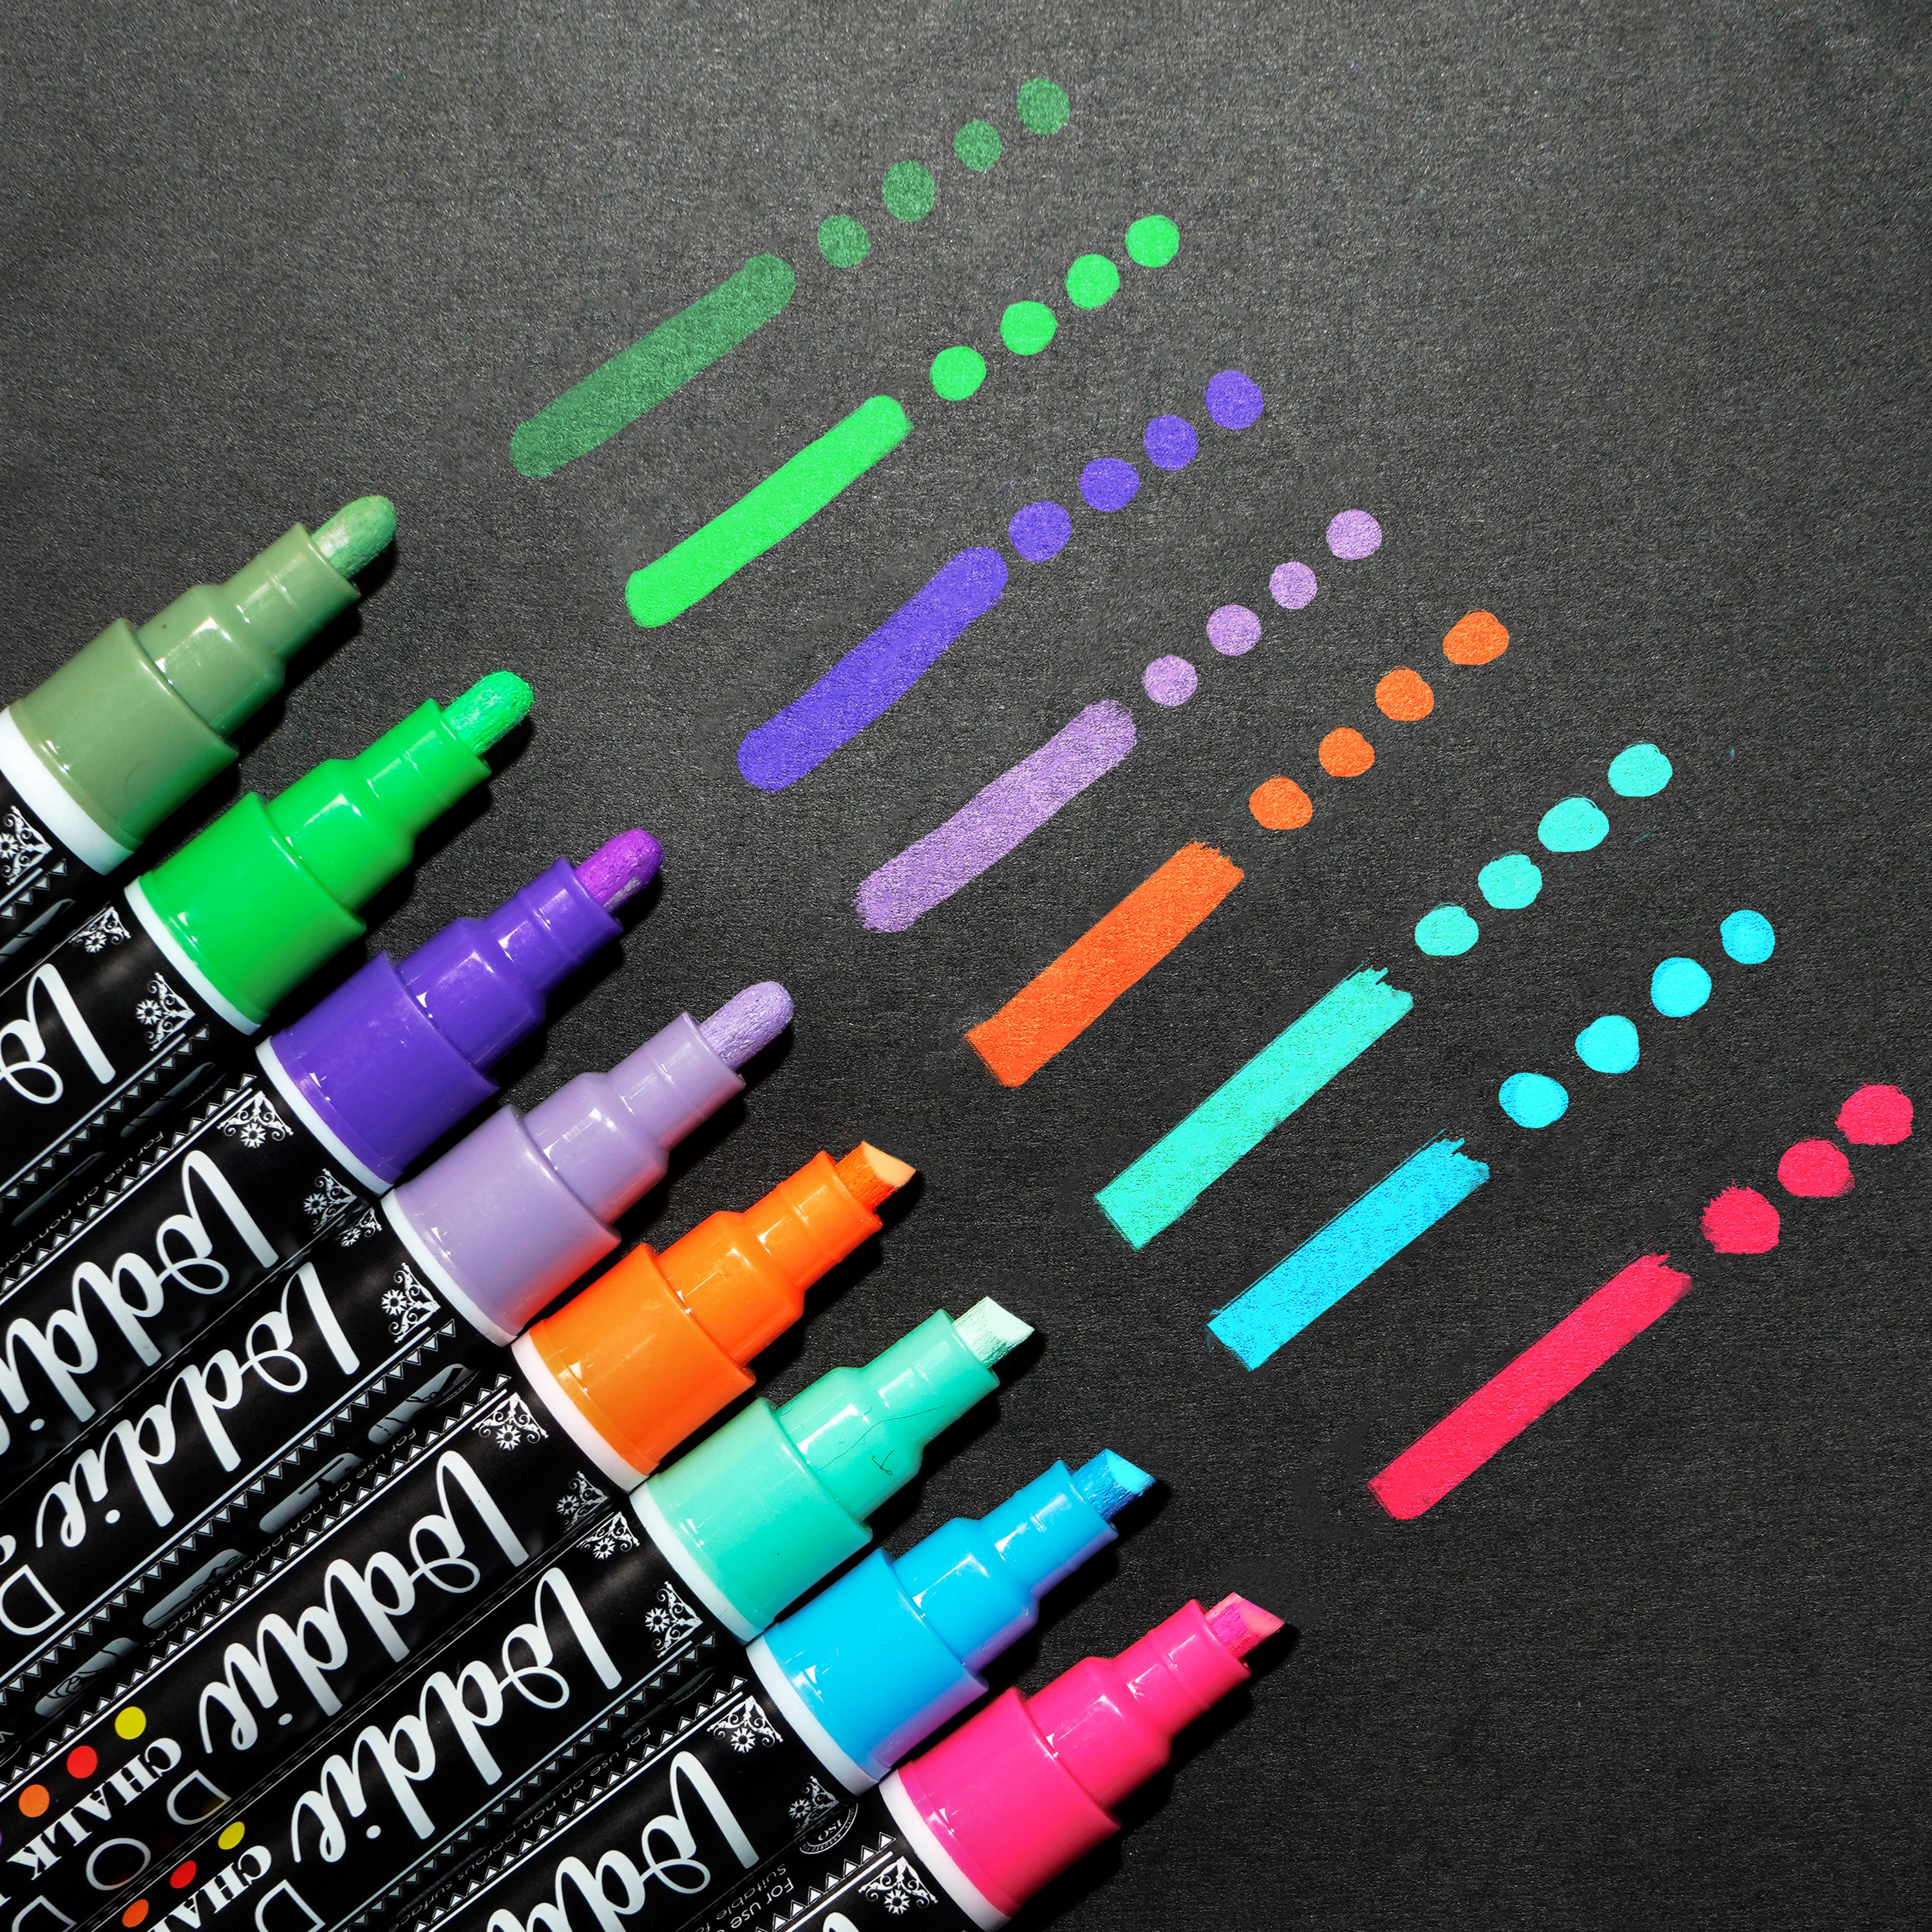 10 Count Rainbow Chalk Markers Limited Edition Lettering by Karen Colors by  Loddie Doddie 